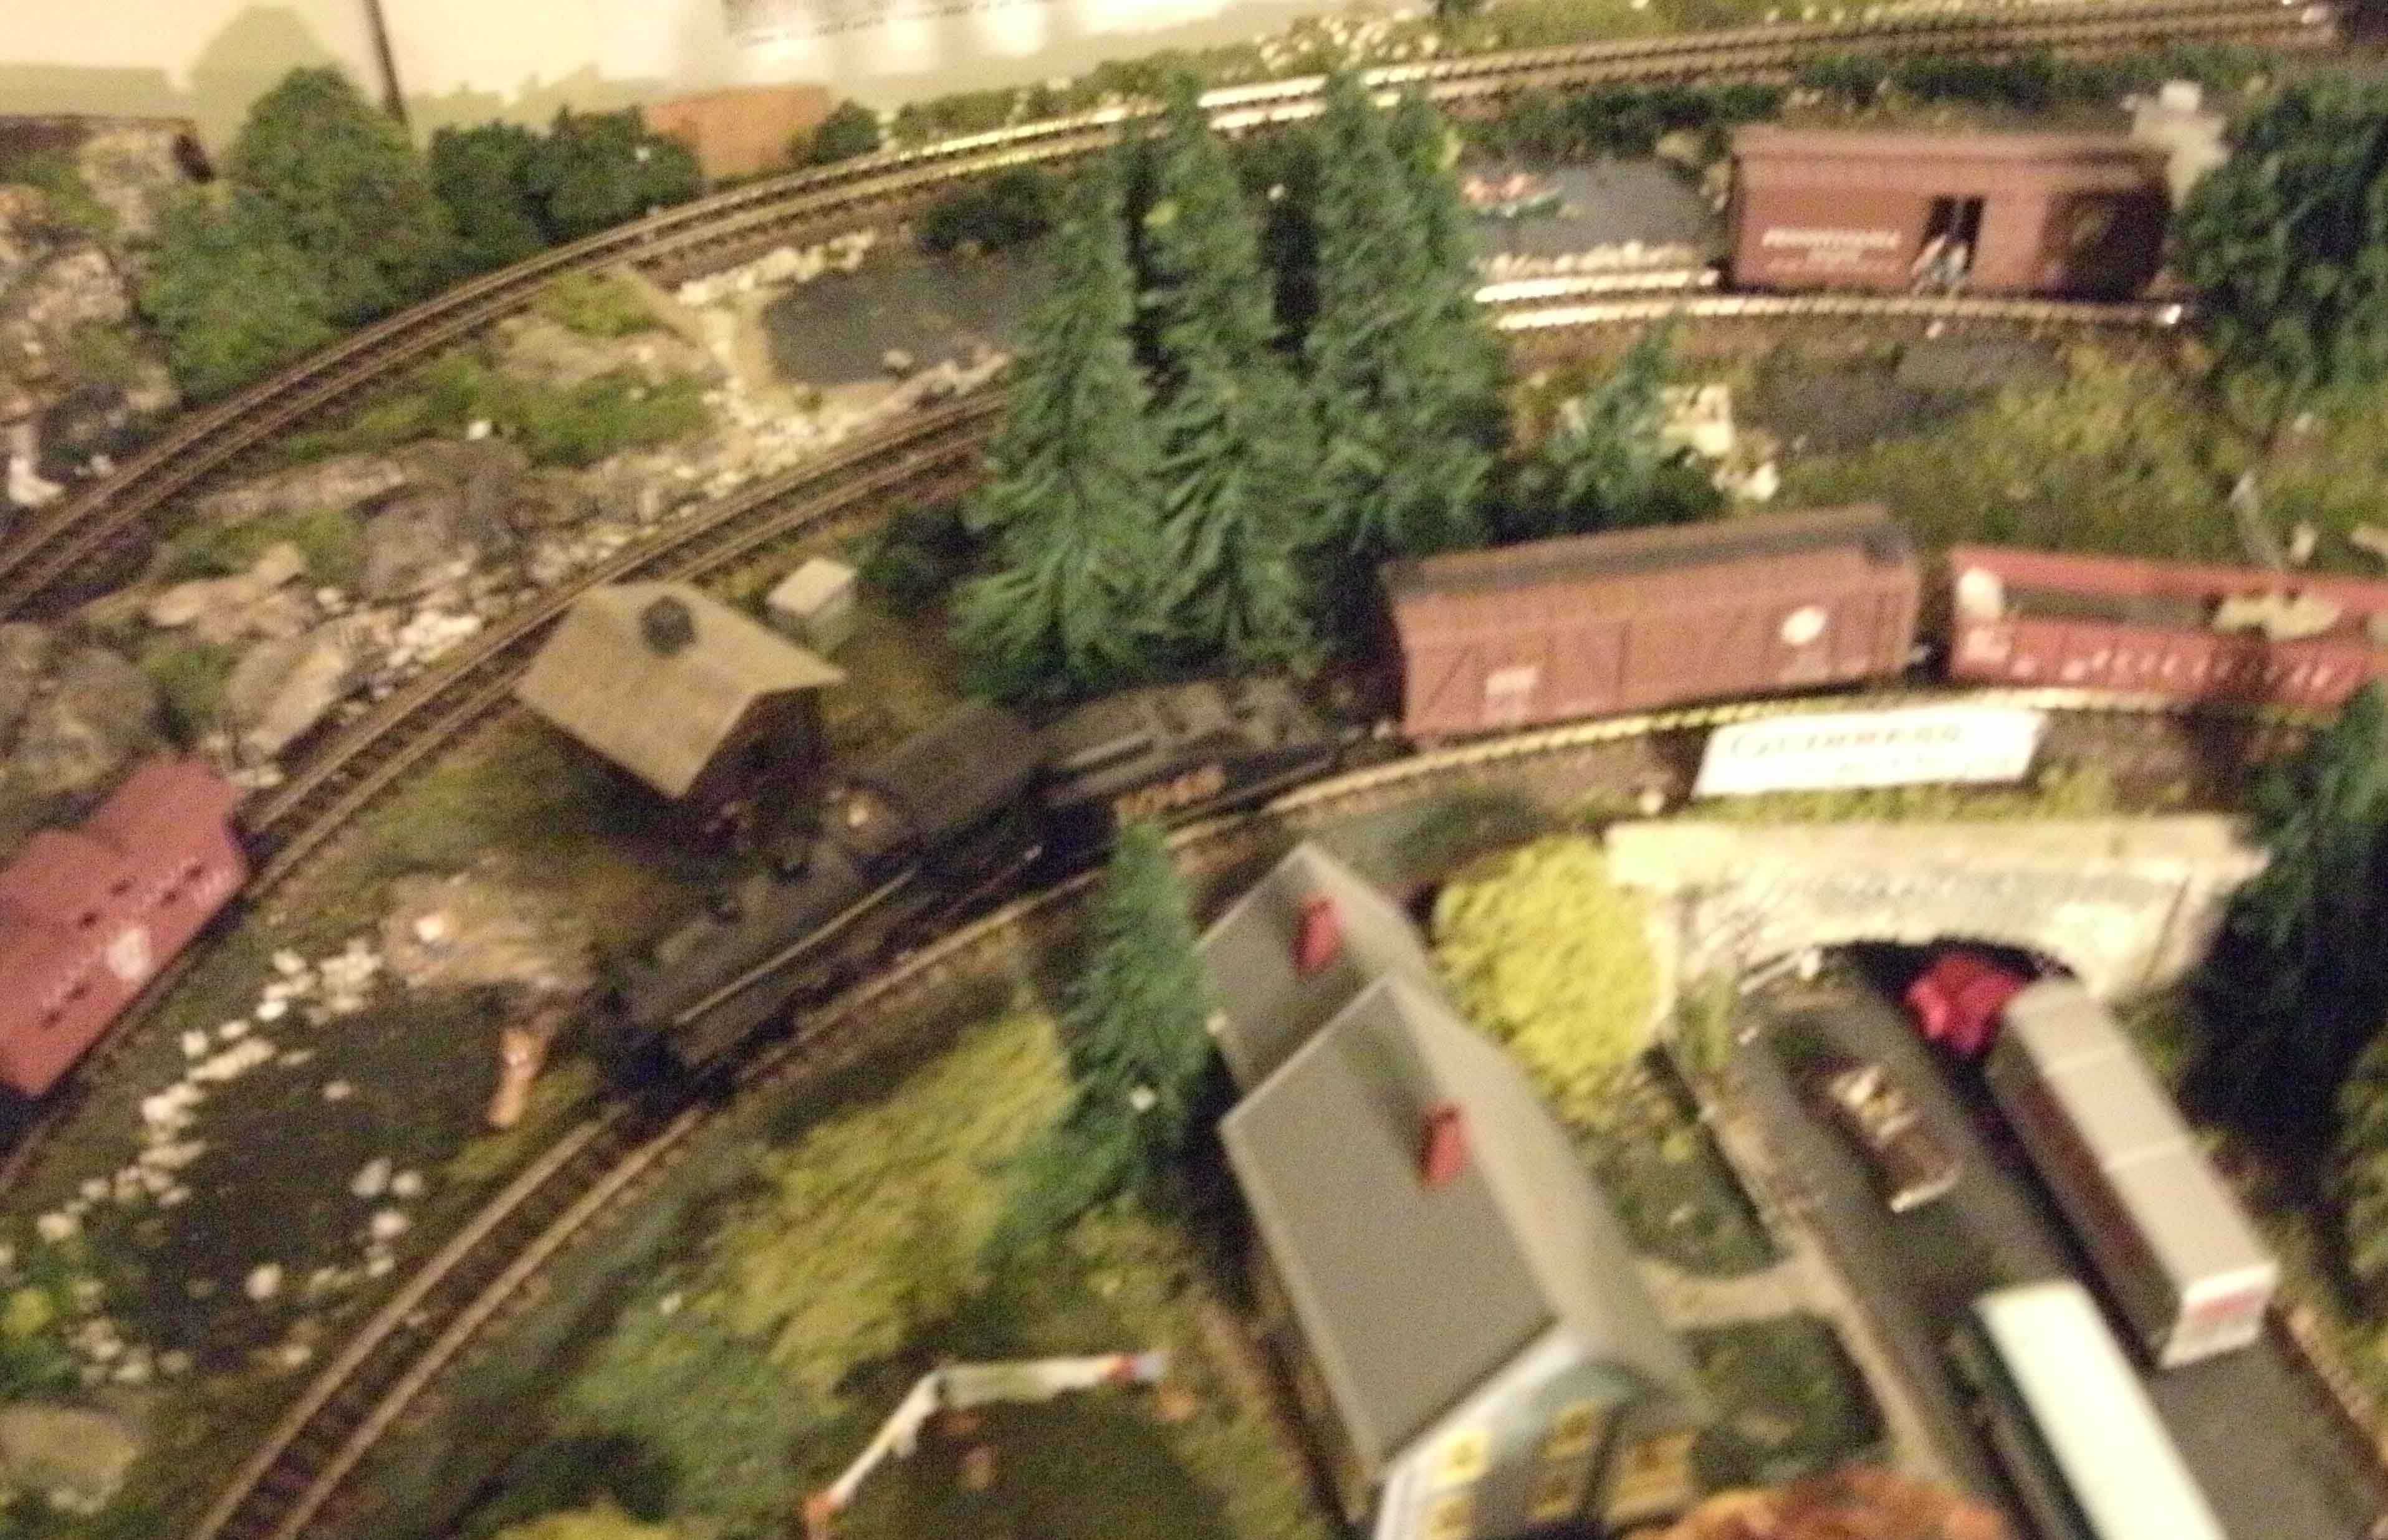  model train layout. The layout is built in N scale with lots of